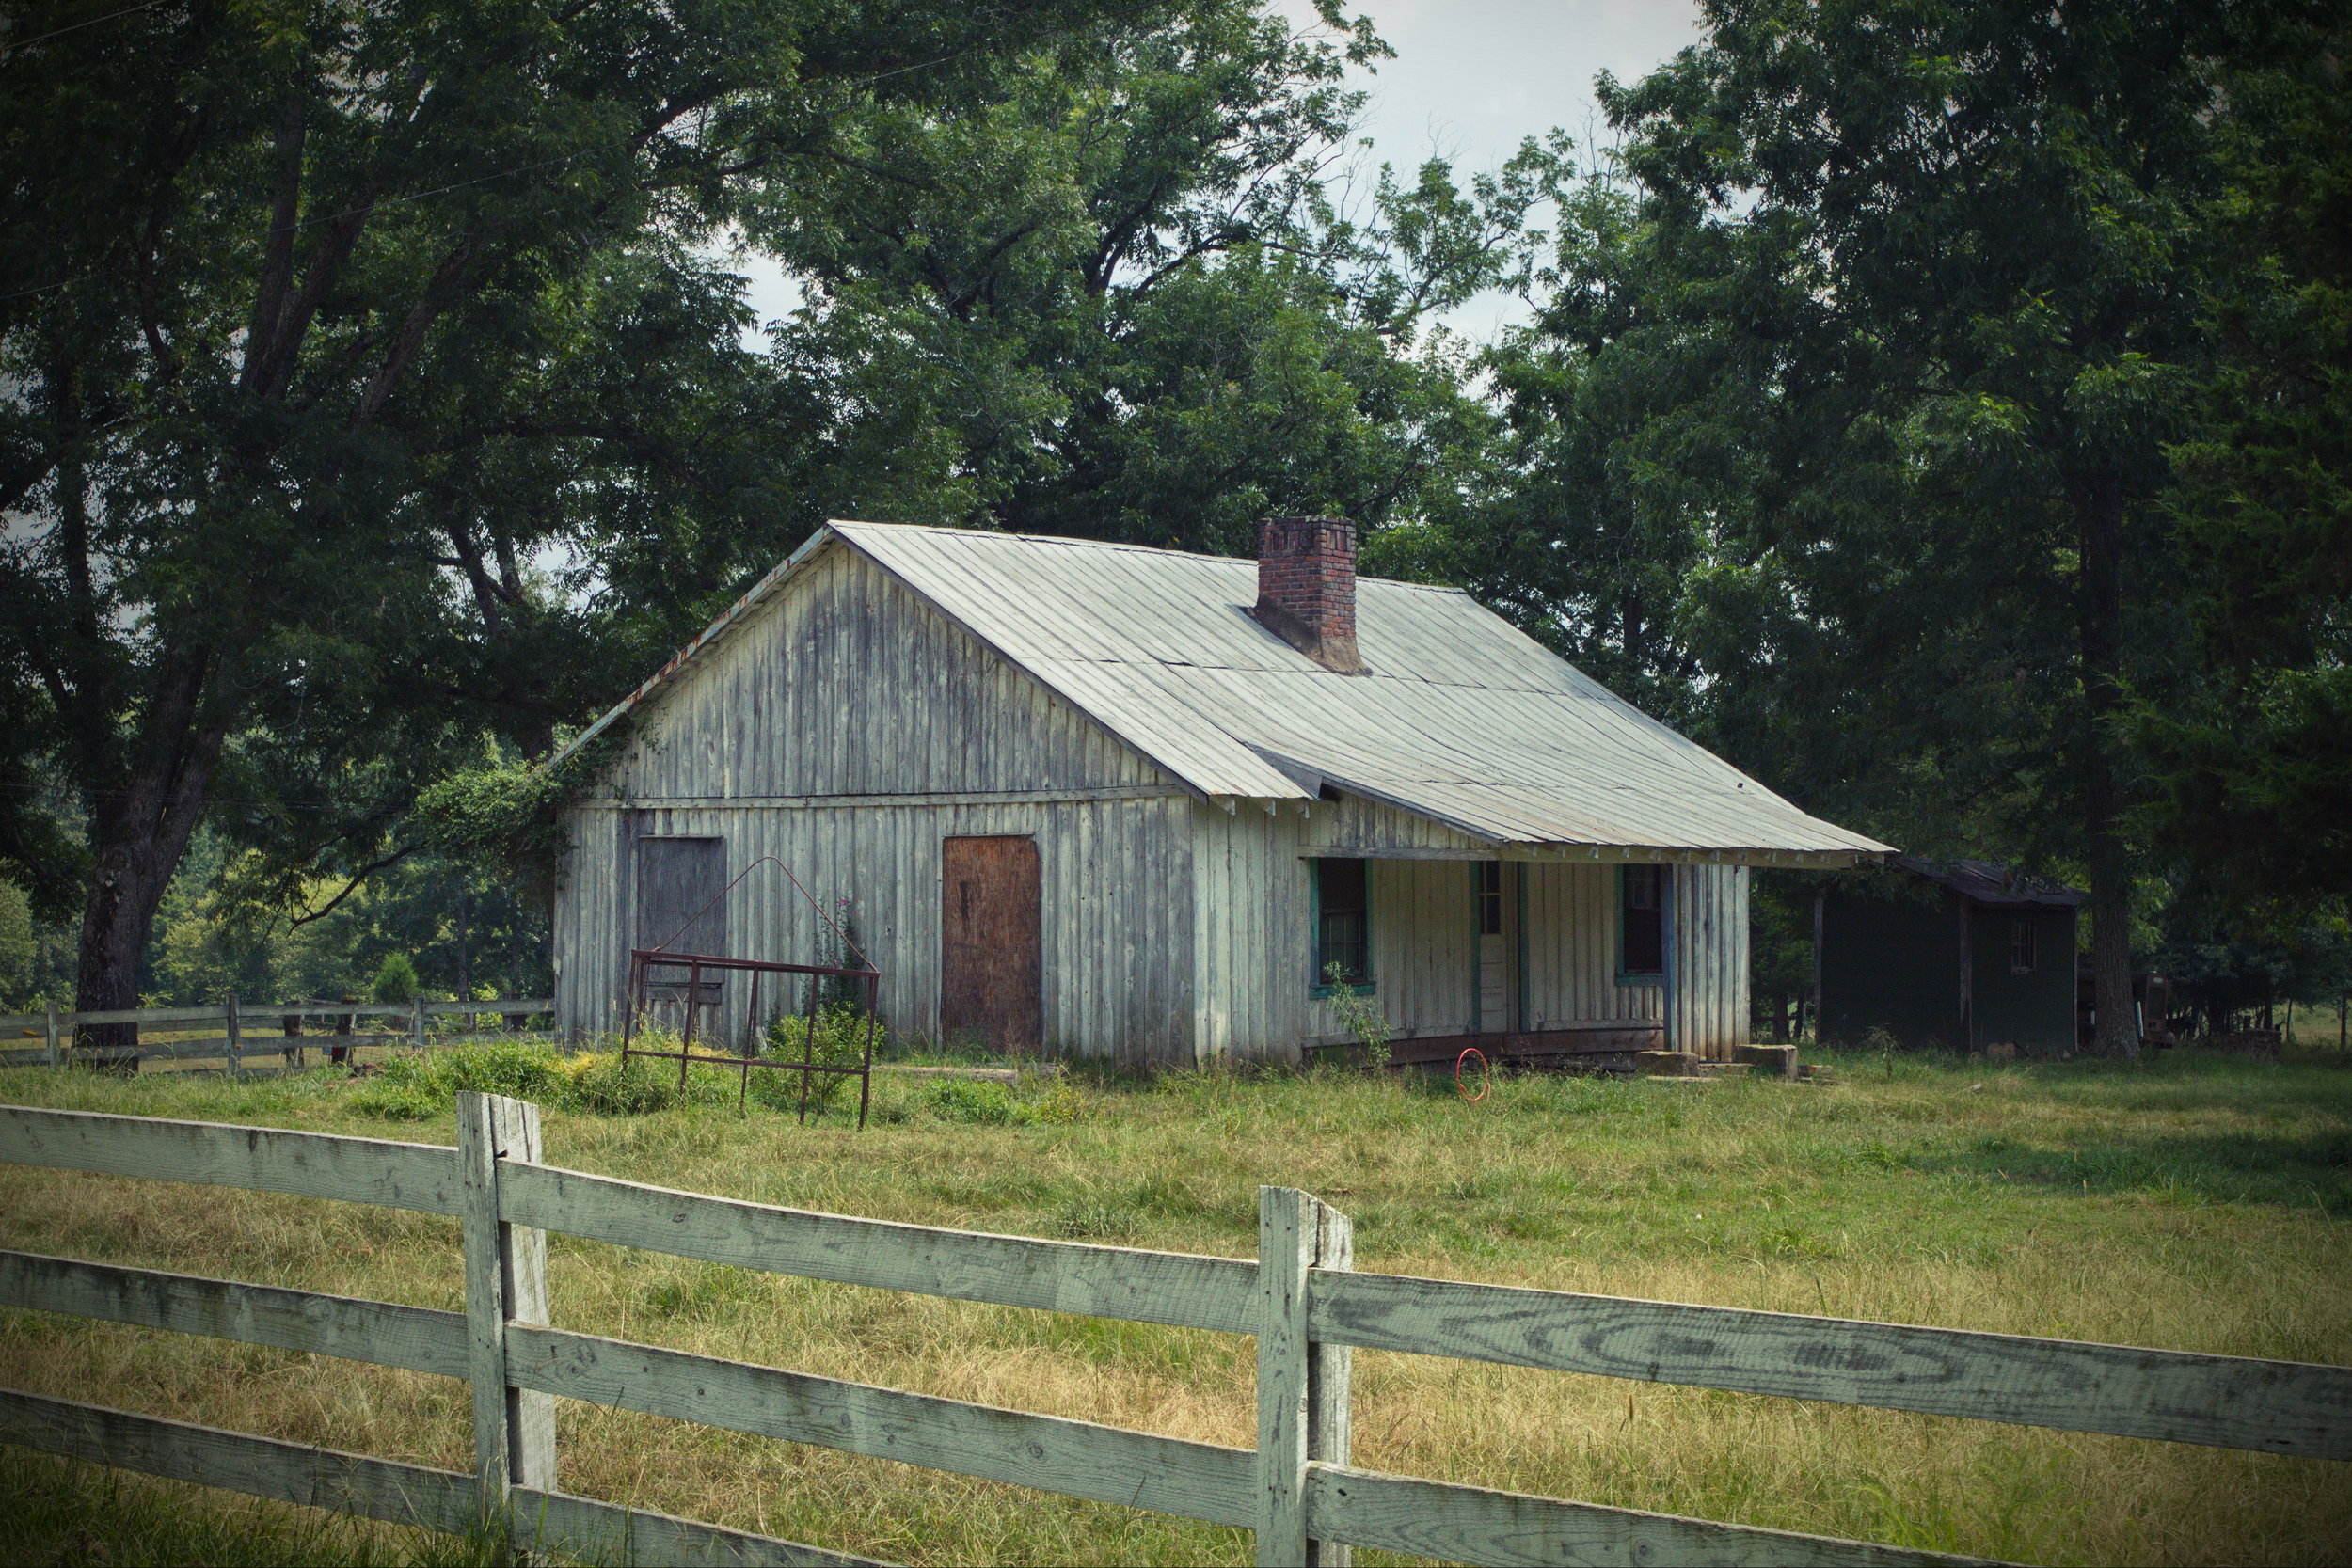  Old house in Benton County 